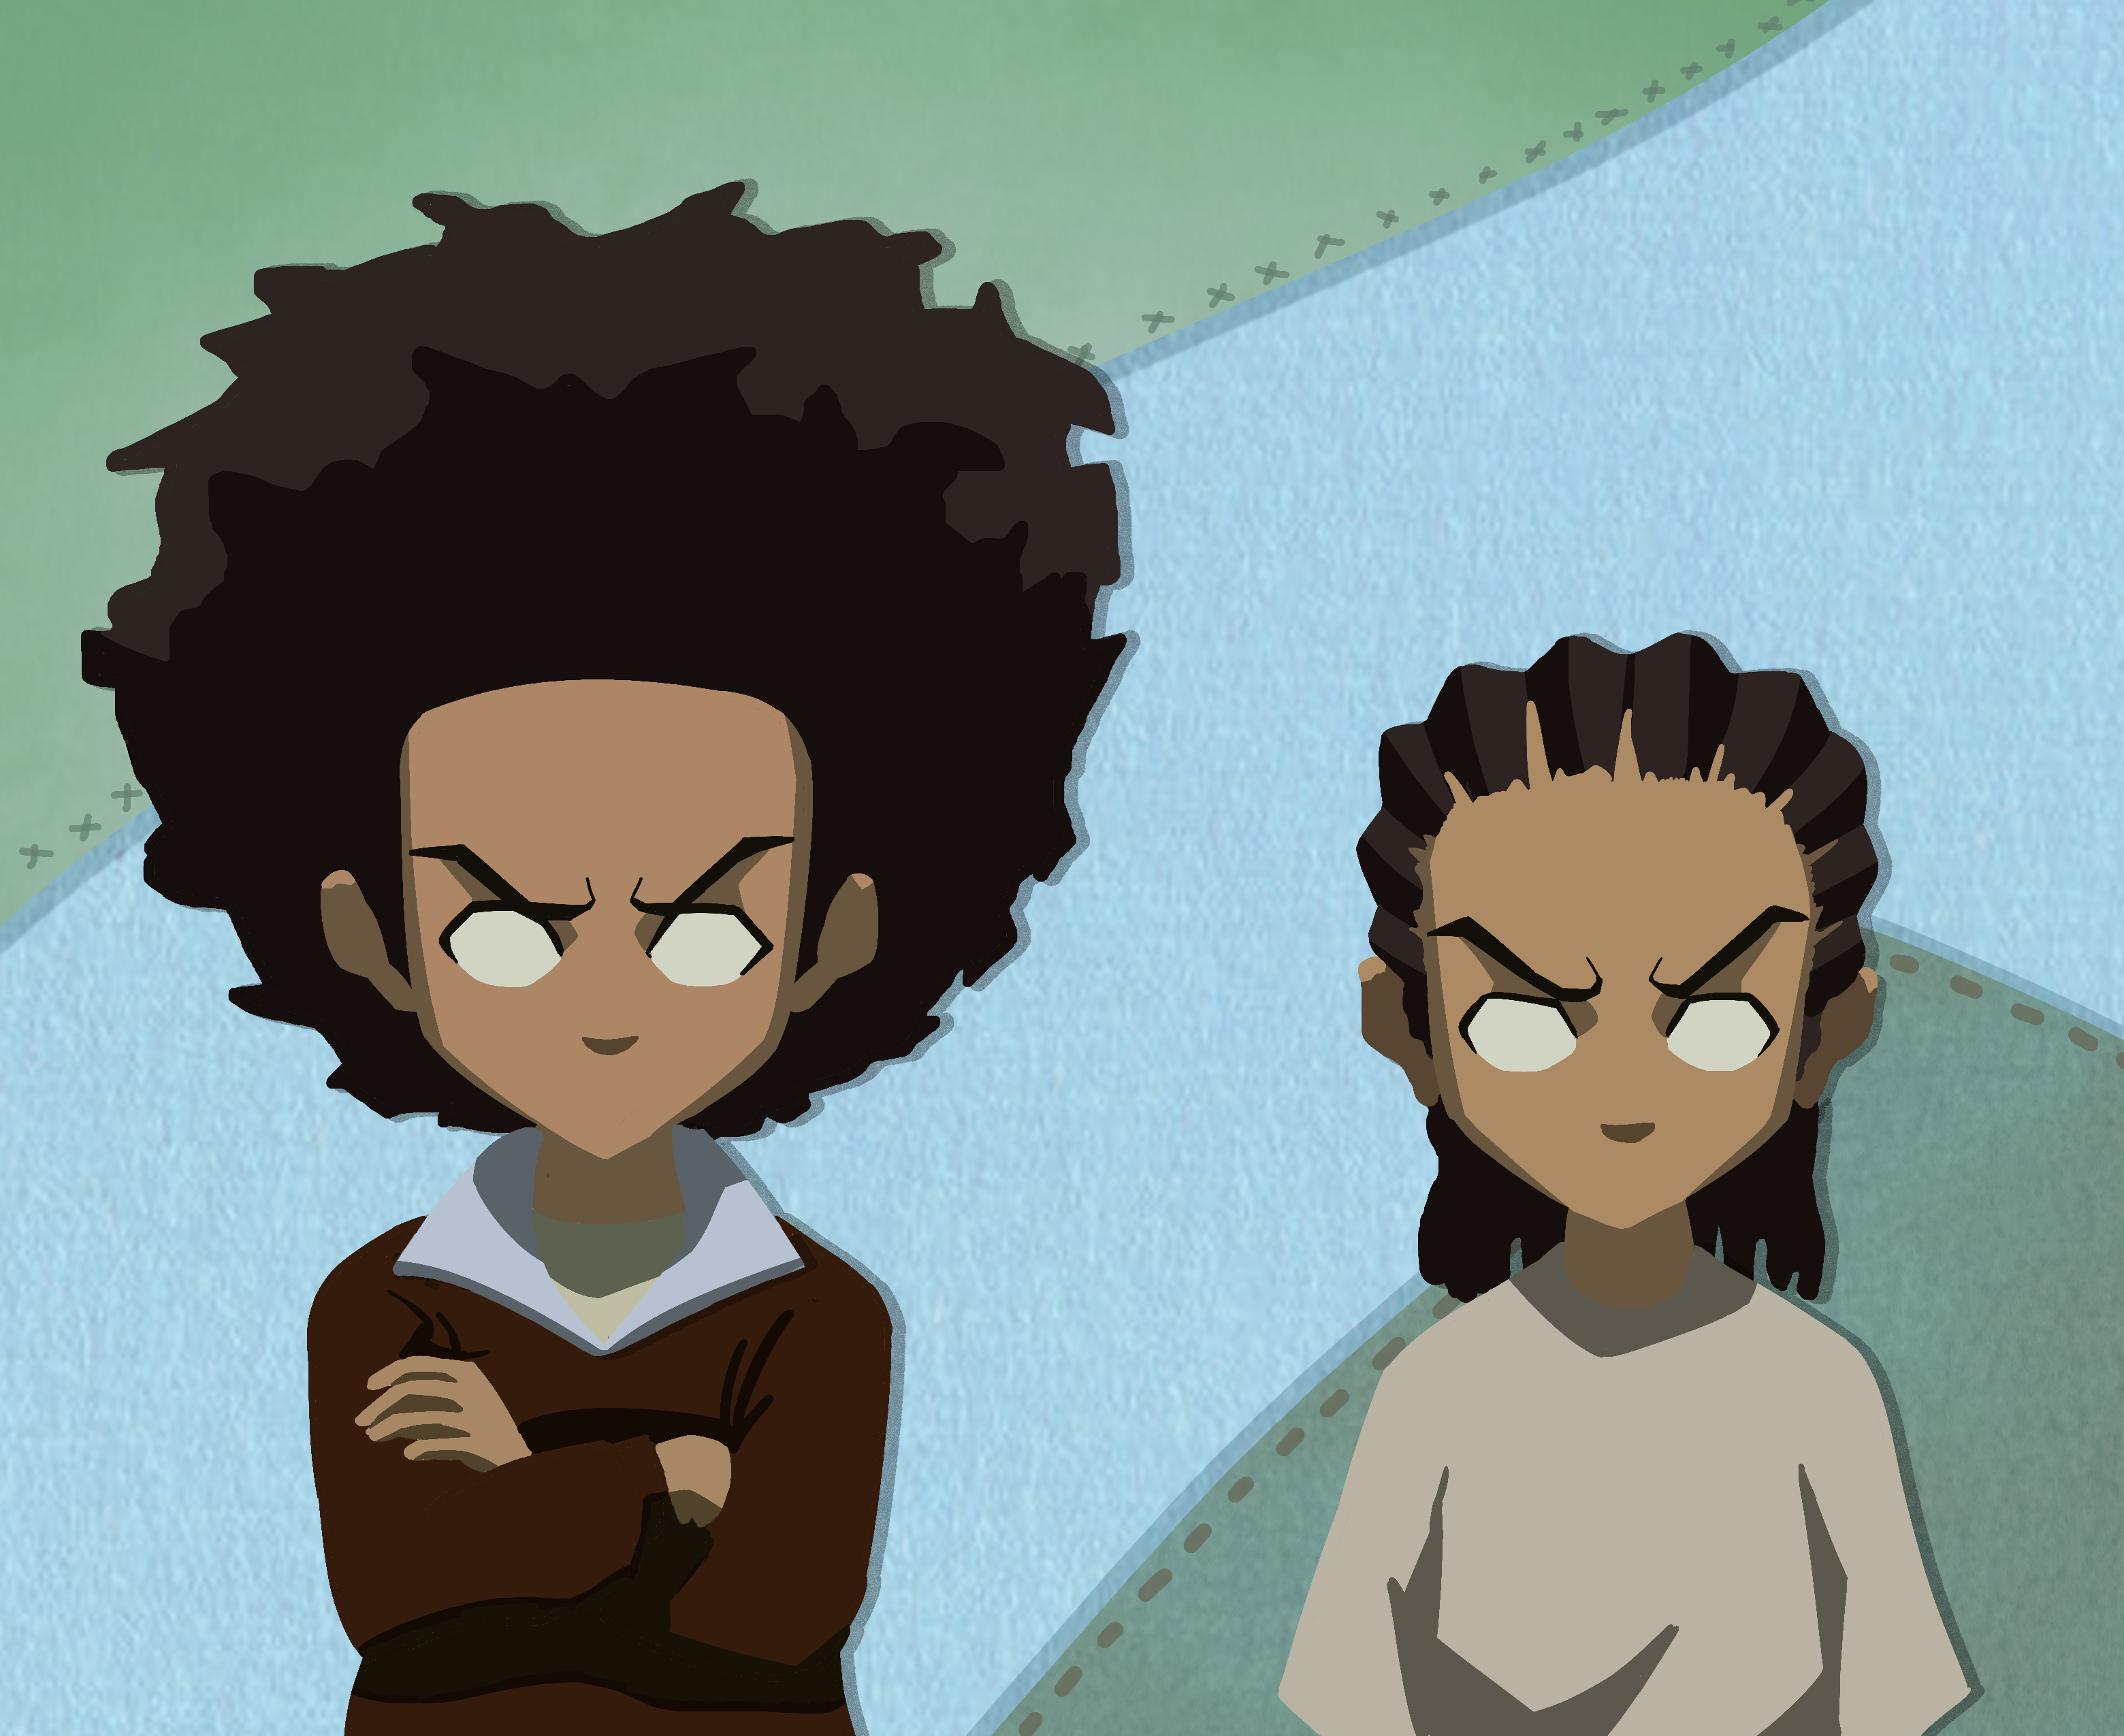 Thumbnail for Aaron McGruder’s superb storytelling in ‘The Boondocks’ crafts a meaningful and relevant portrayal of society